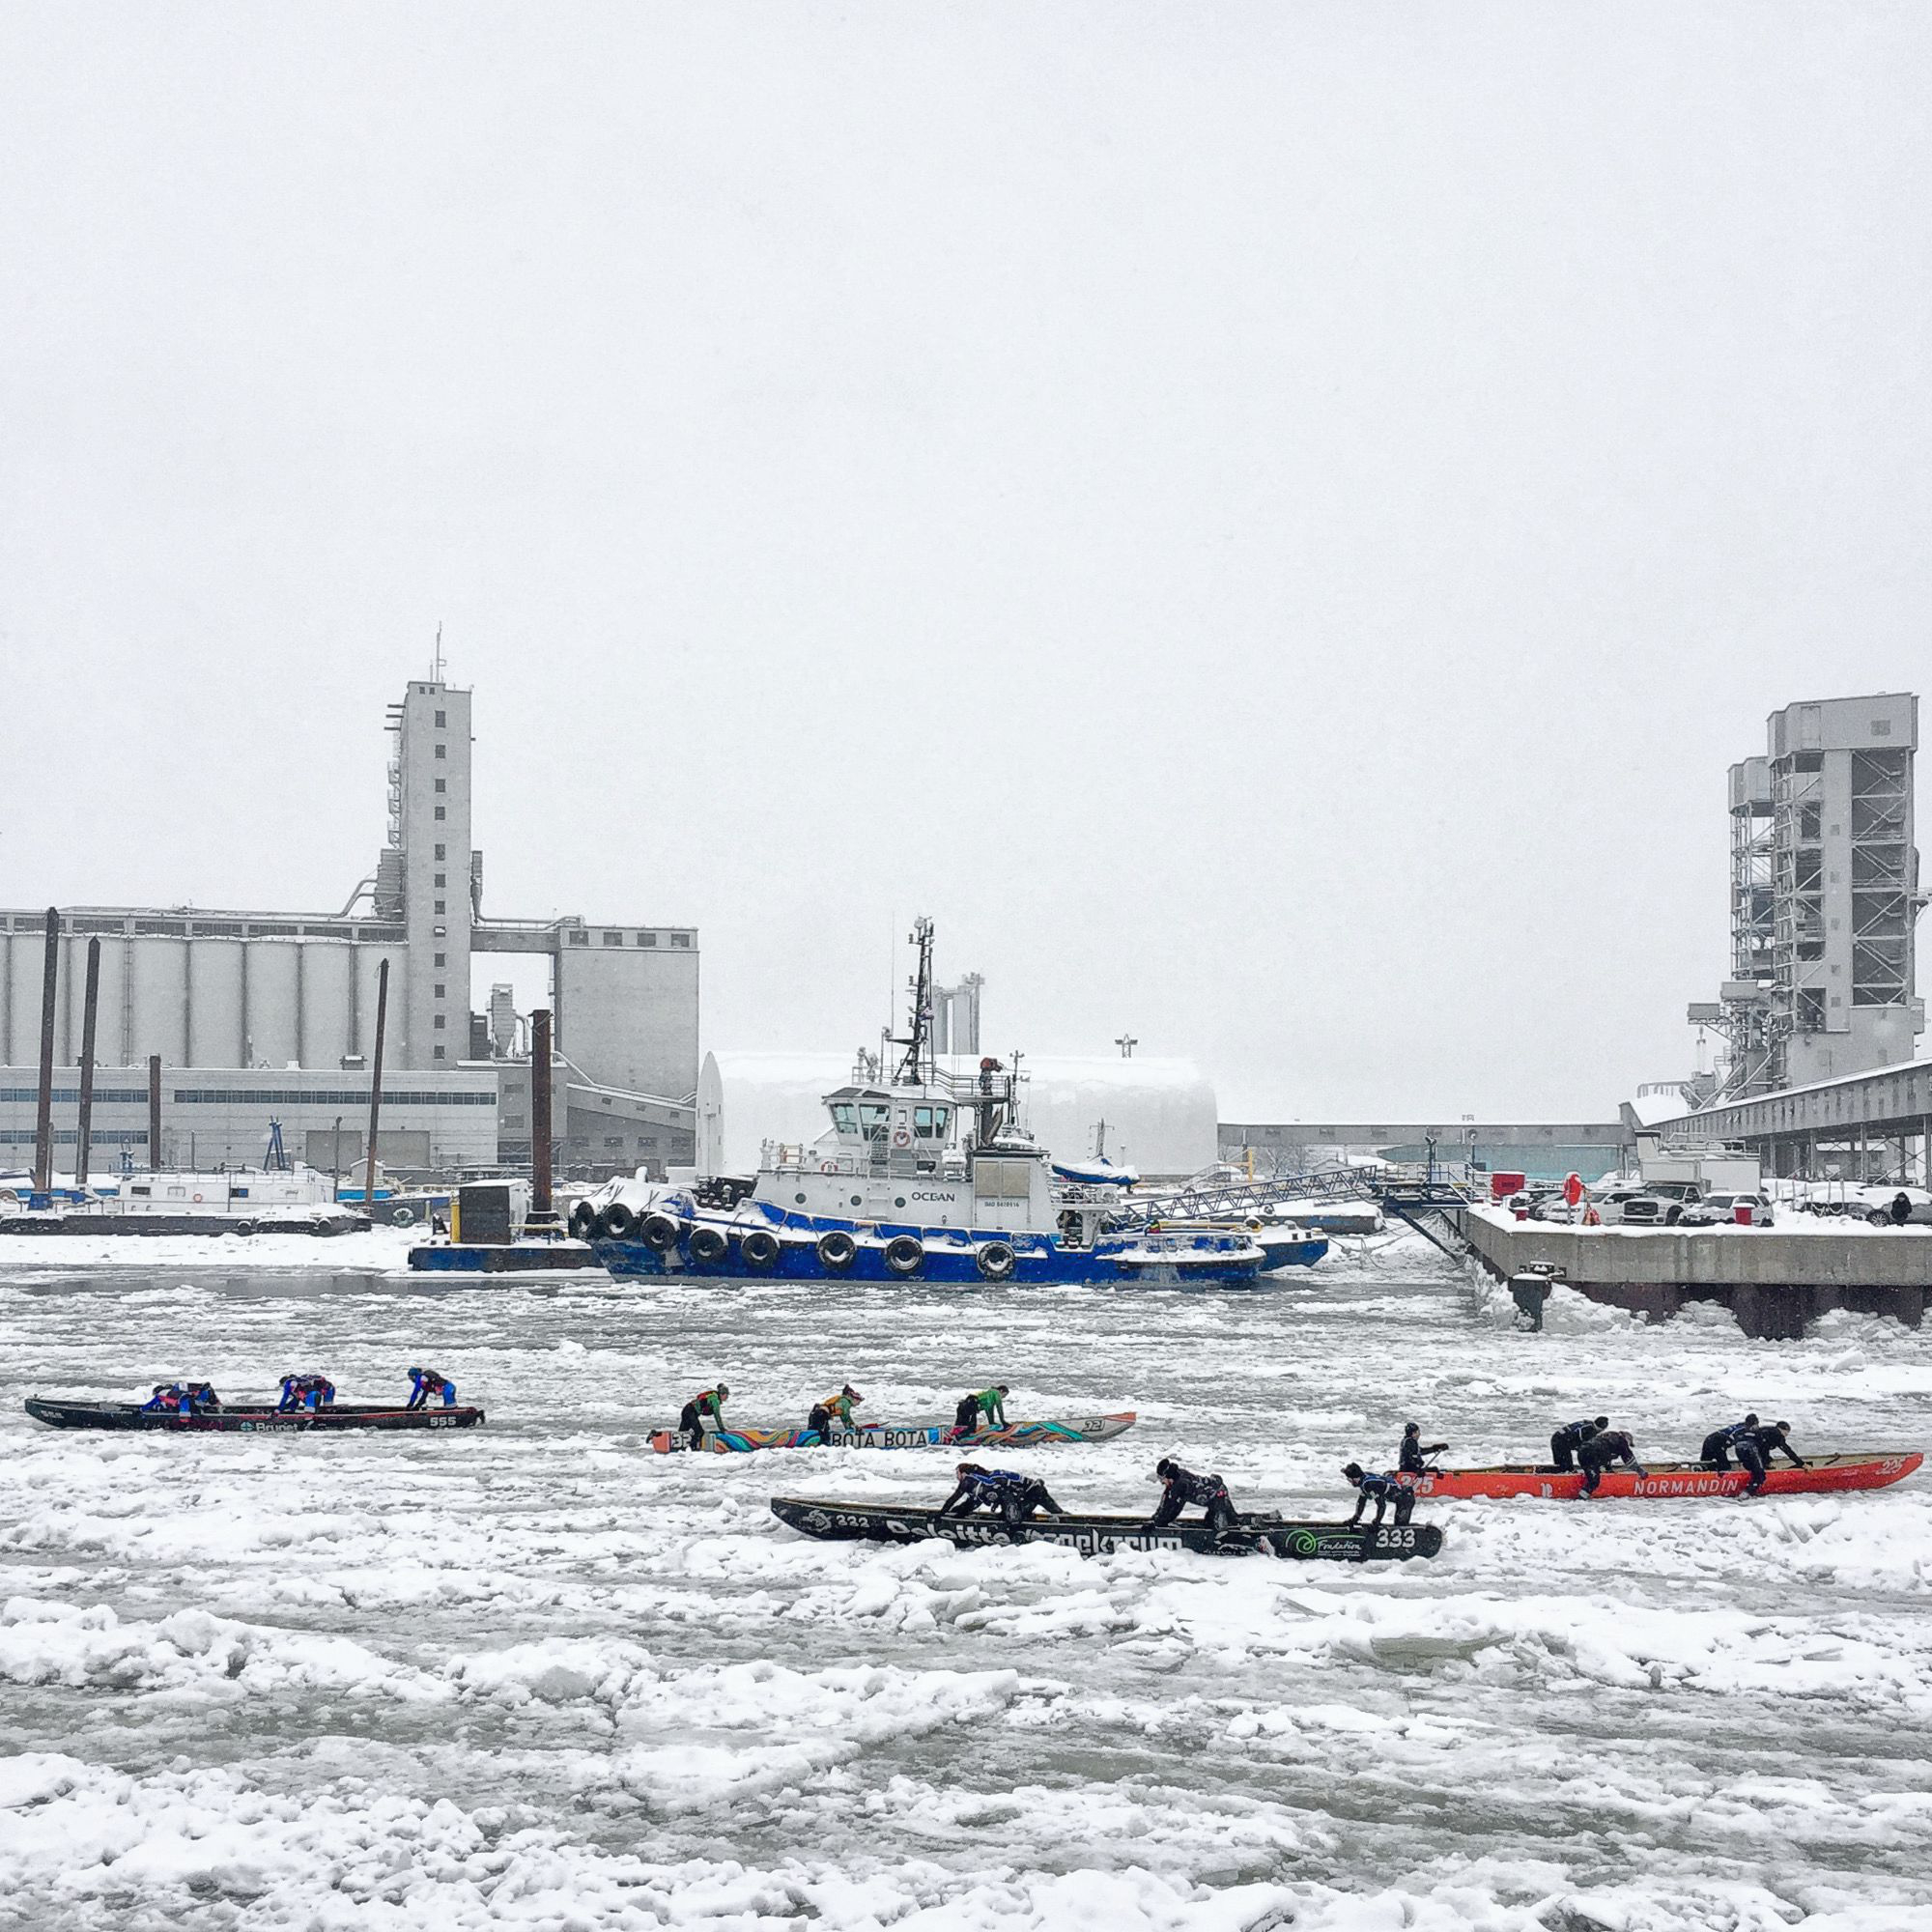 Four canoes participating in a winter race across the icy waters of the Saint-Lawrence river near Québec